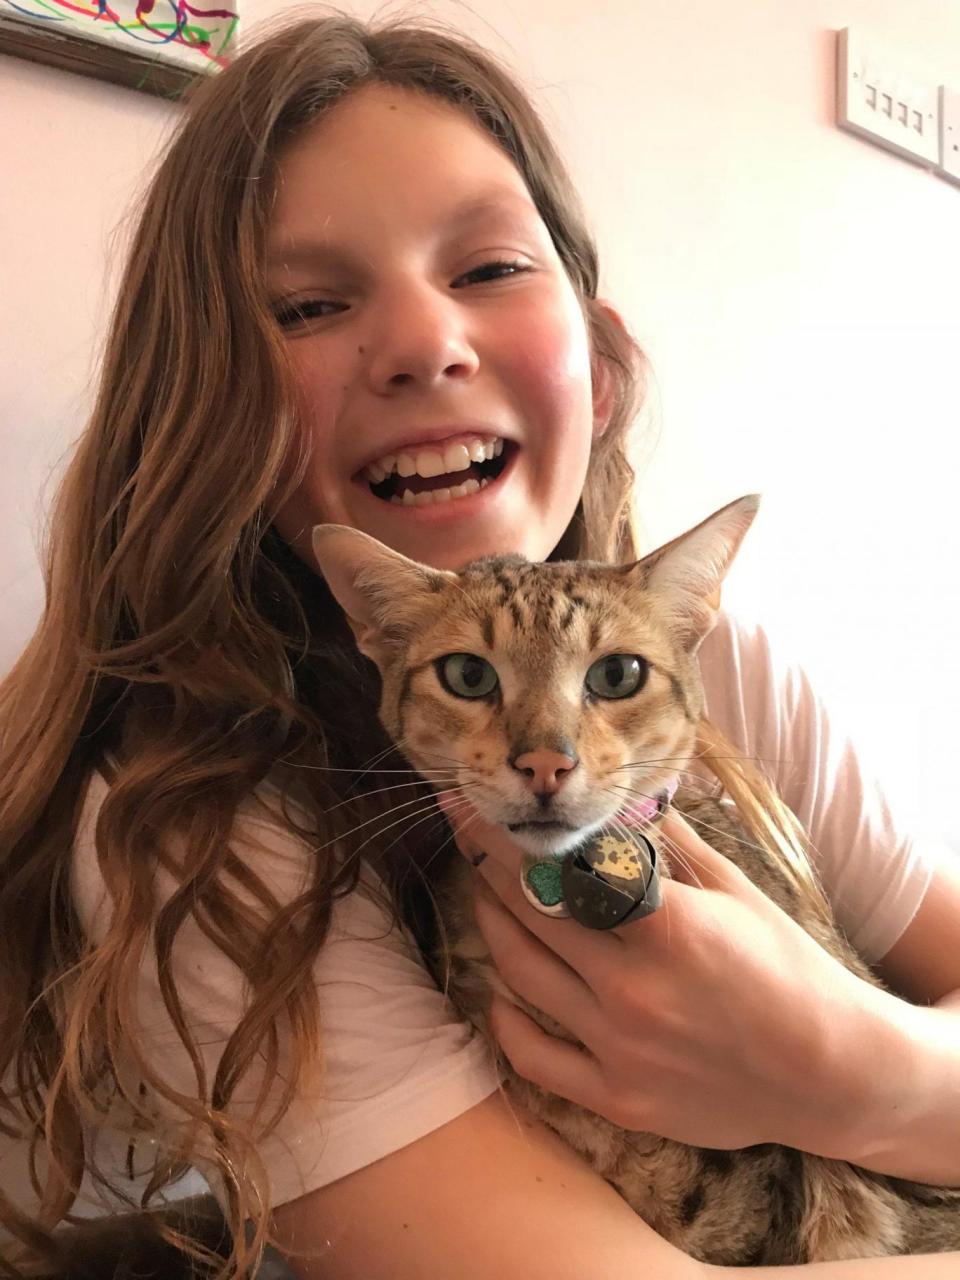 Ms Glass's daughter, Tabitha, pictured with Harley before he was found mutilated